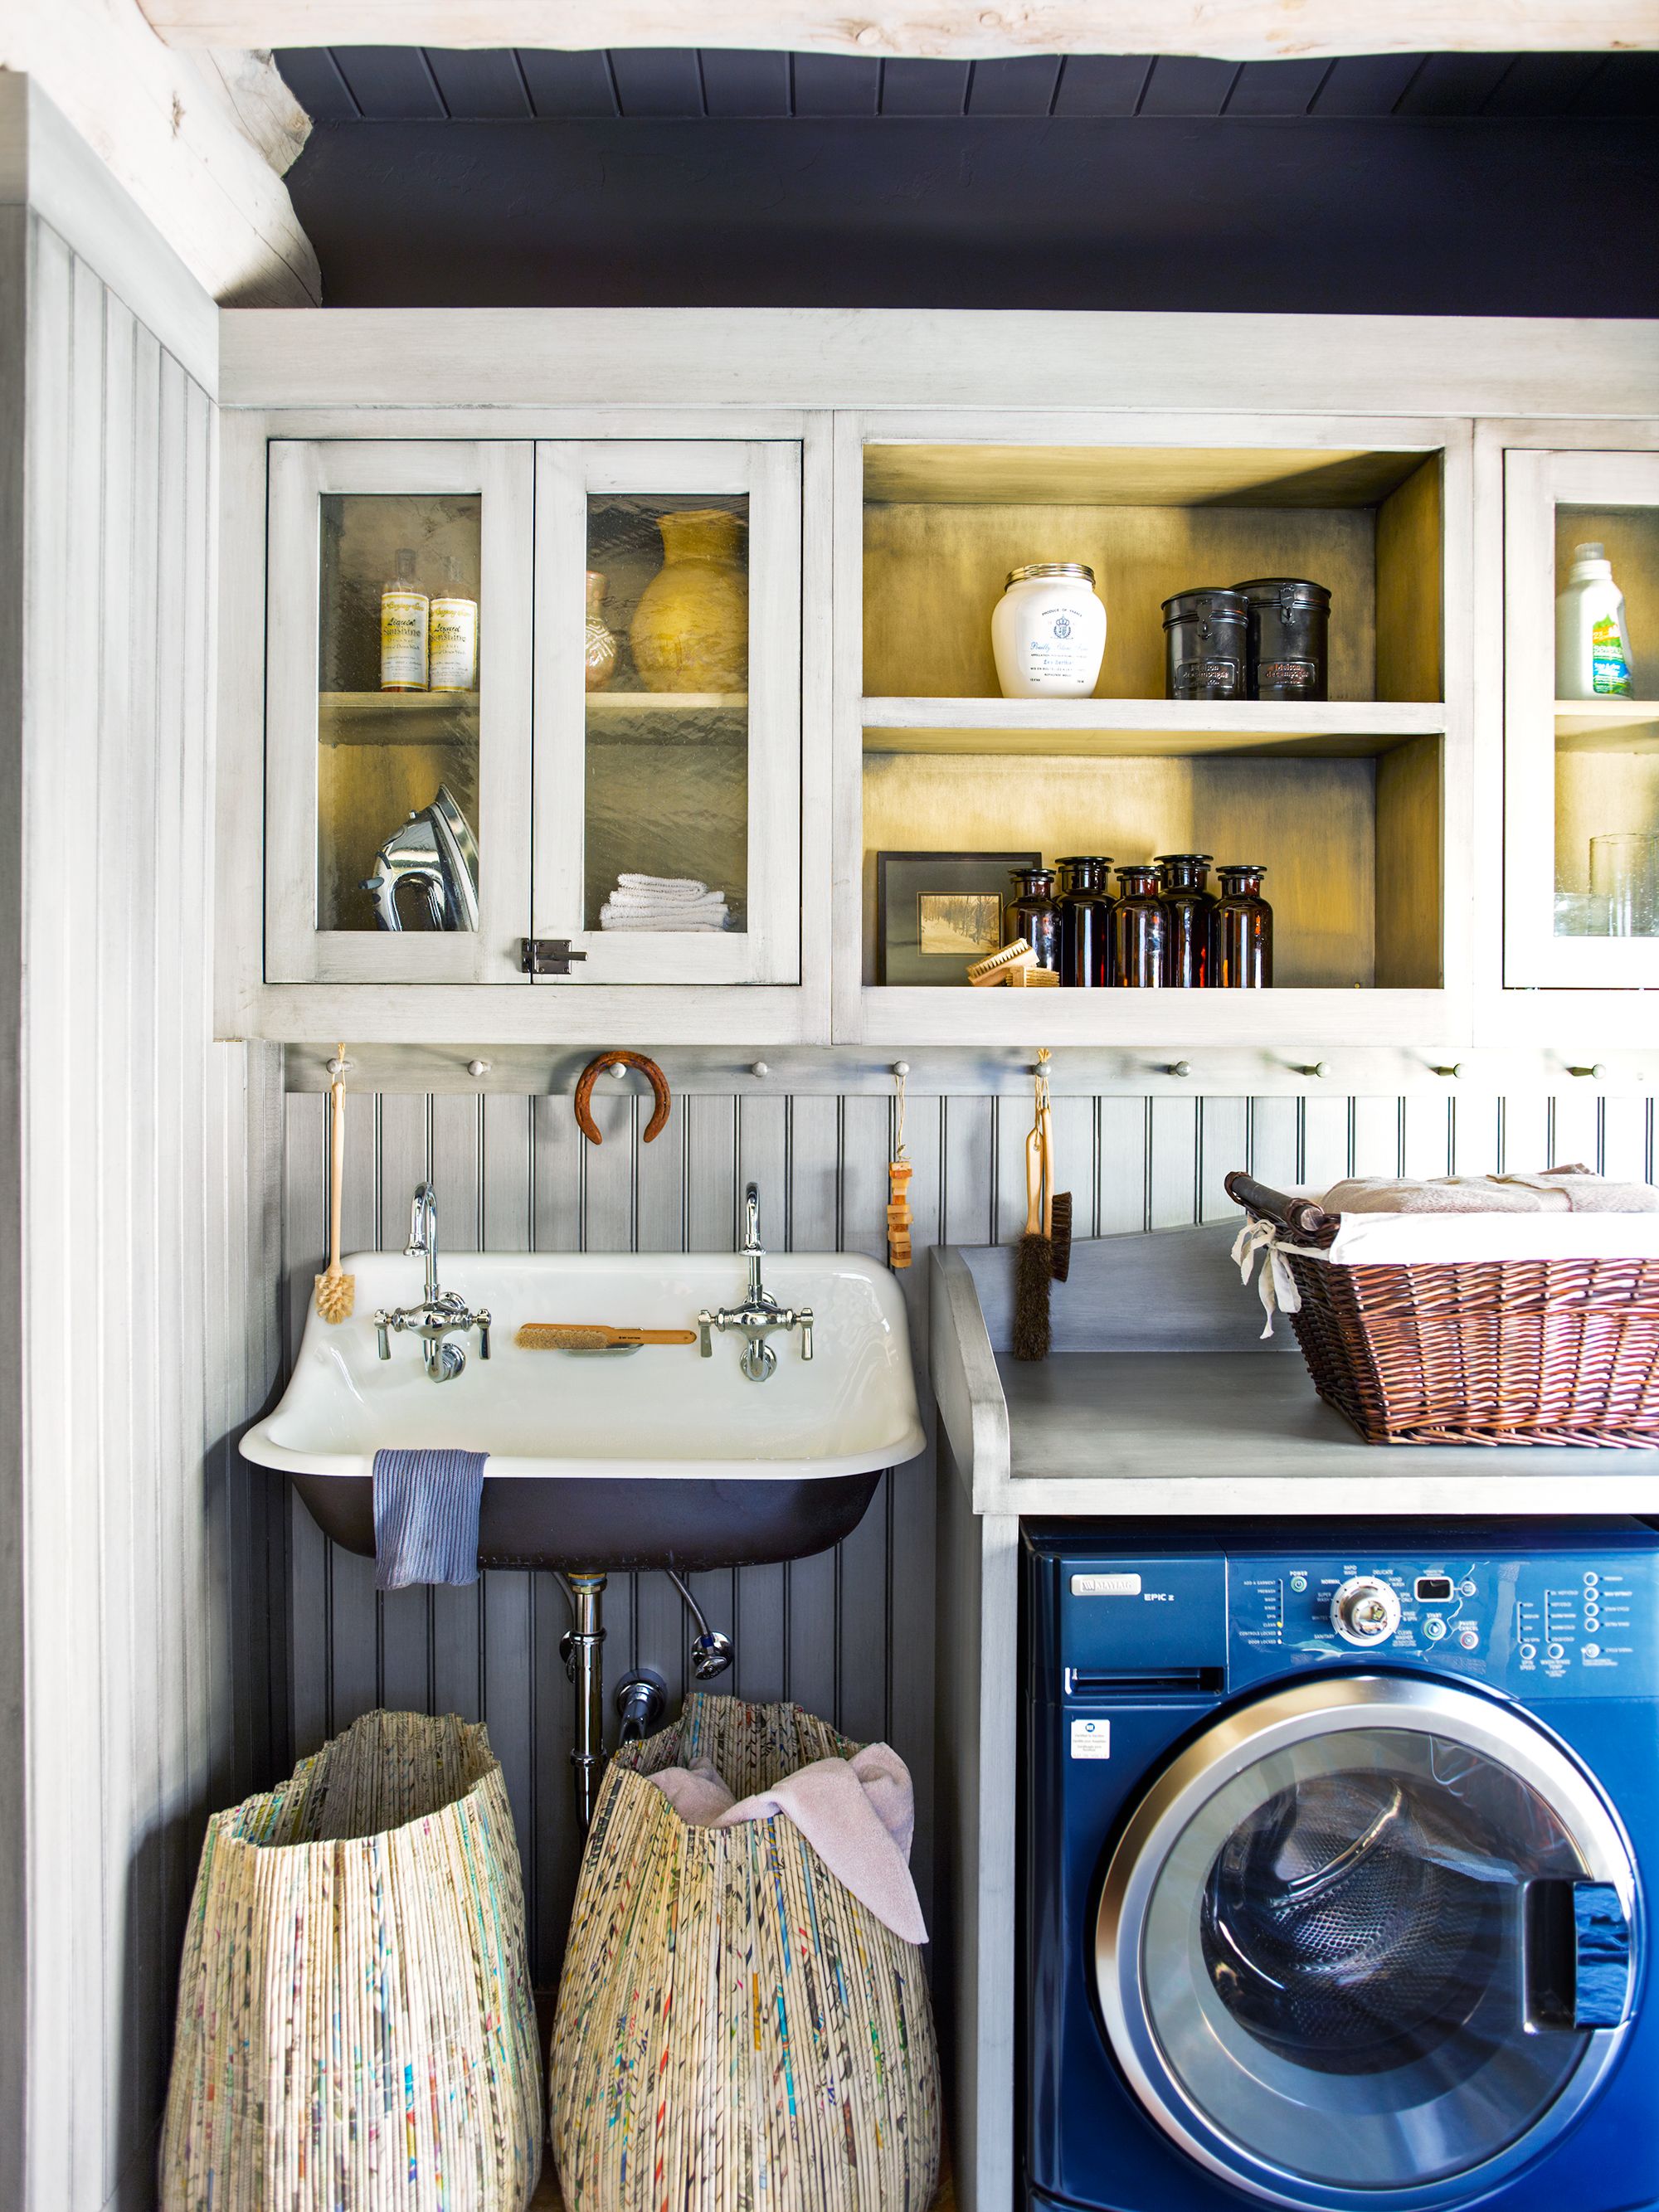 25 Clever Cabinet and Drawer Storage Ideas for Your Home  Small space  laundry room storage, Laundry room storage, Clever storage